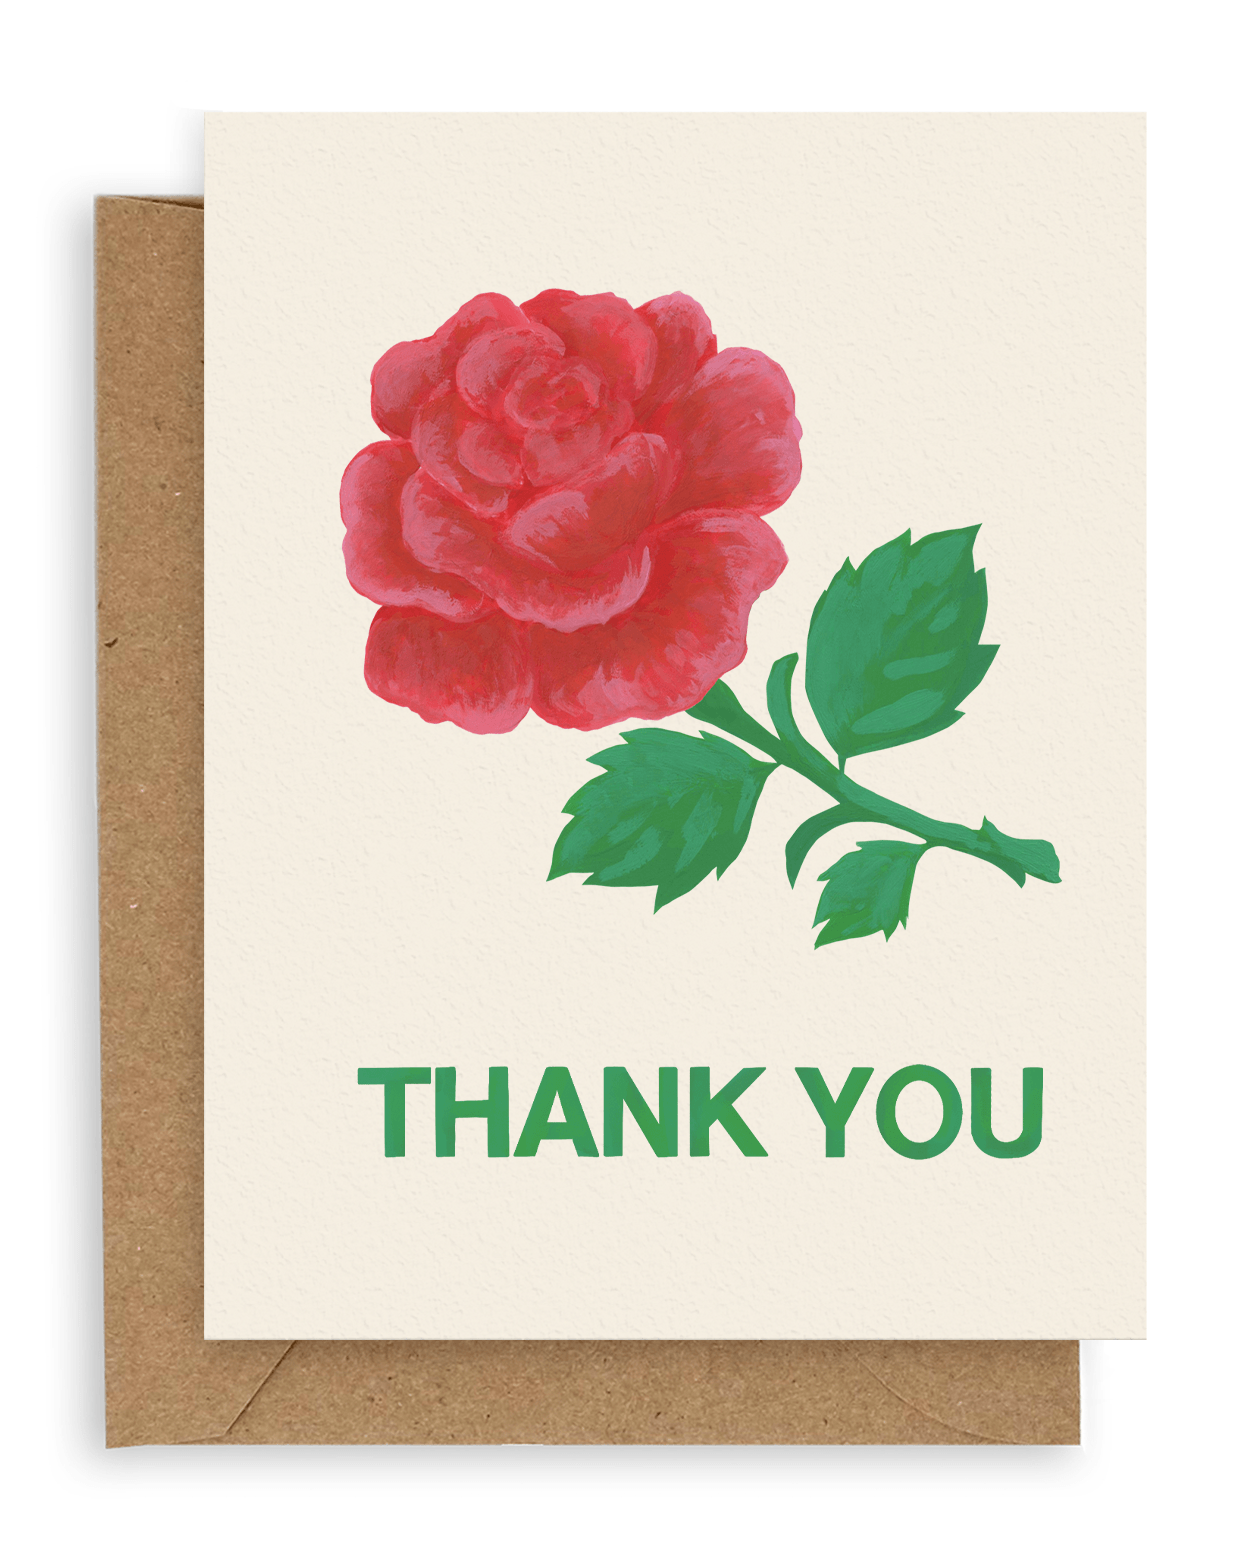  Cream colored background featuring a big red rose with a green stem and leaves, below it is written in green-colored font "Thank You" printed on cardstock with a kraft envelope.